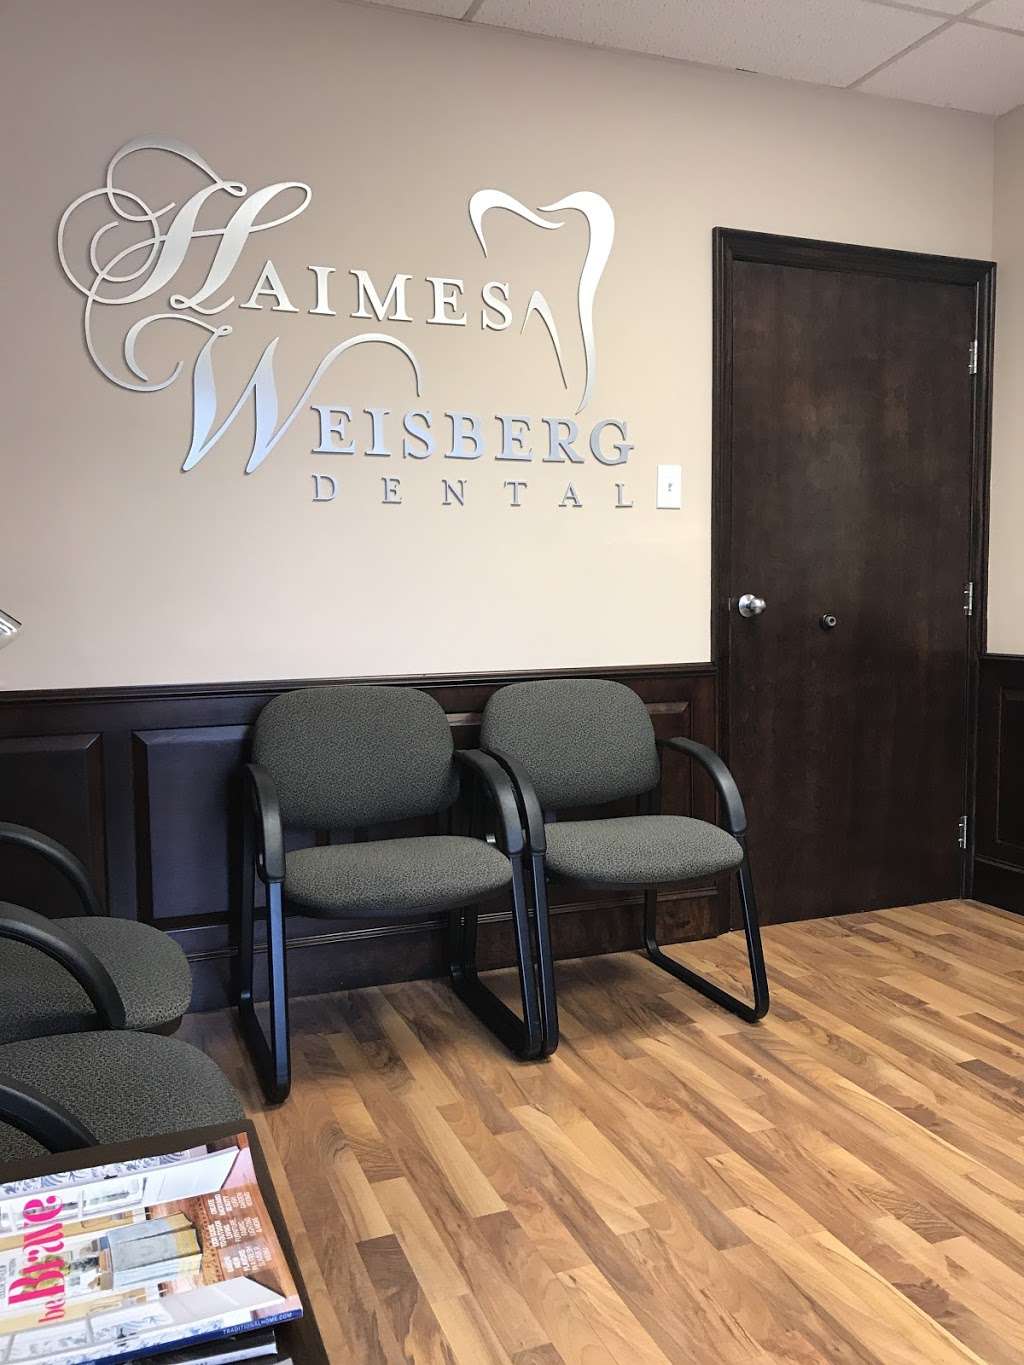 Haimes & Weisberg Family Dentistry | 28a, 1901 N Olden Ave, Ewing Township, NJ 08618 | Phone: (609) 882-2294